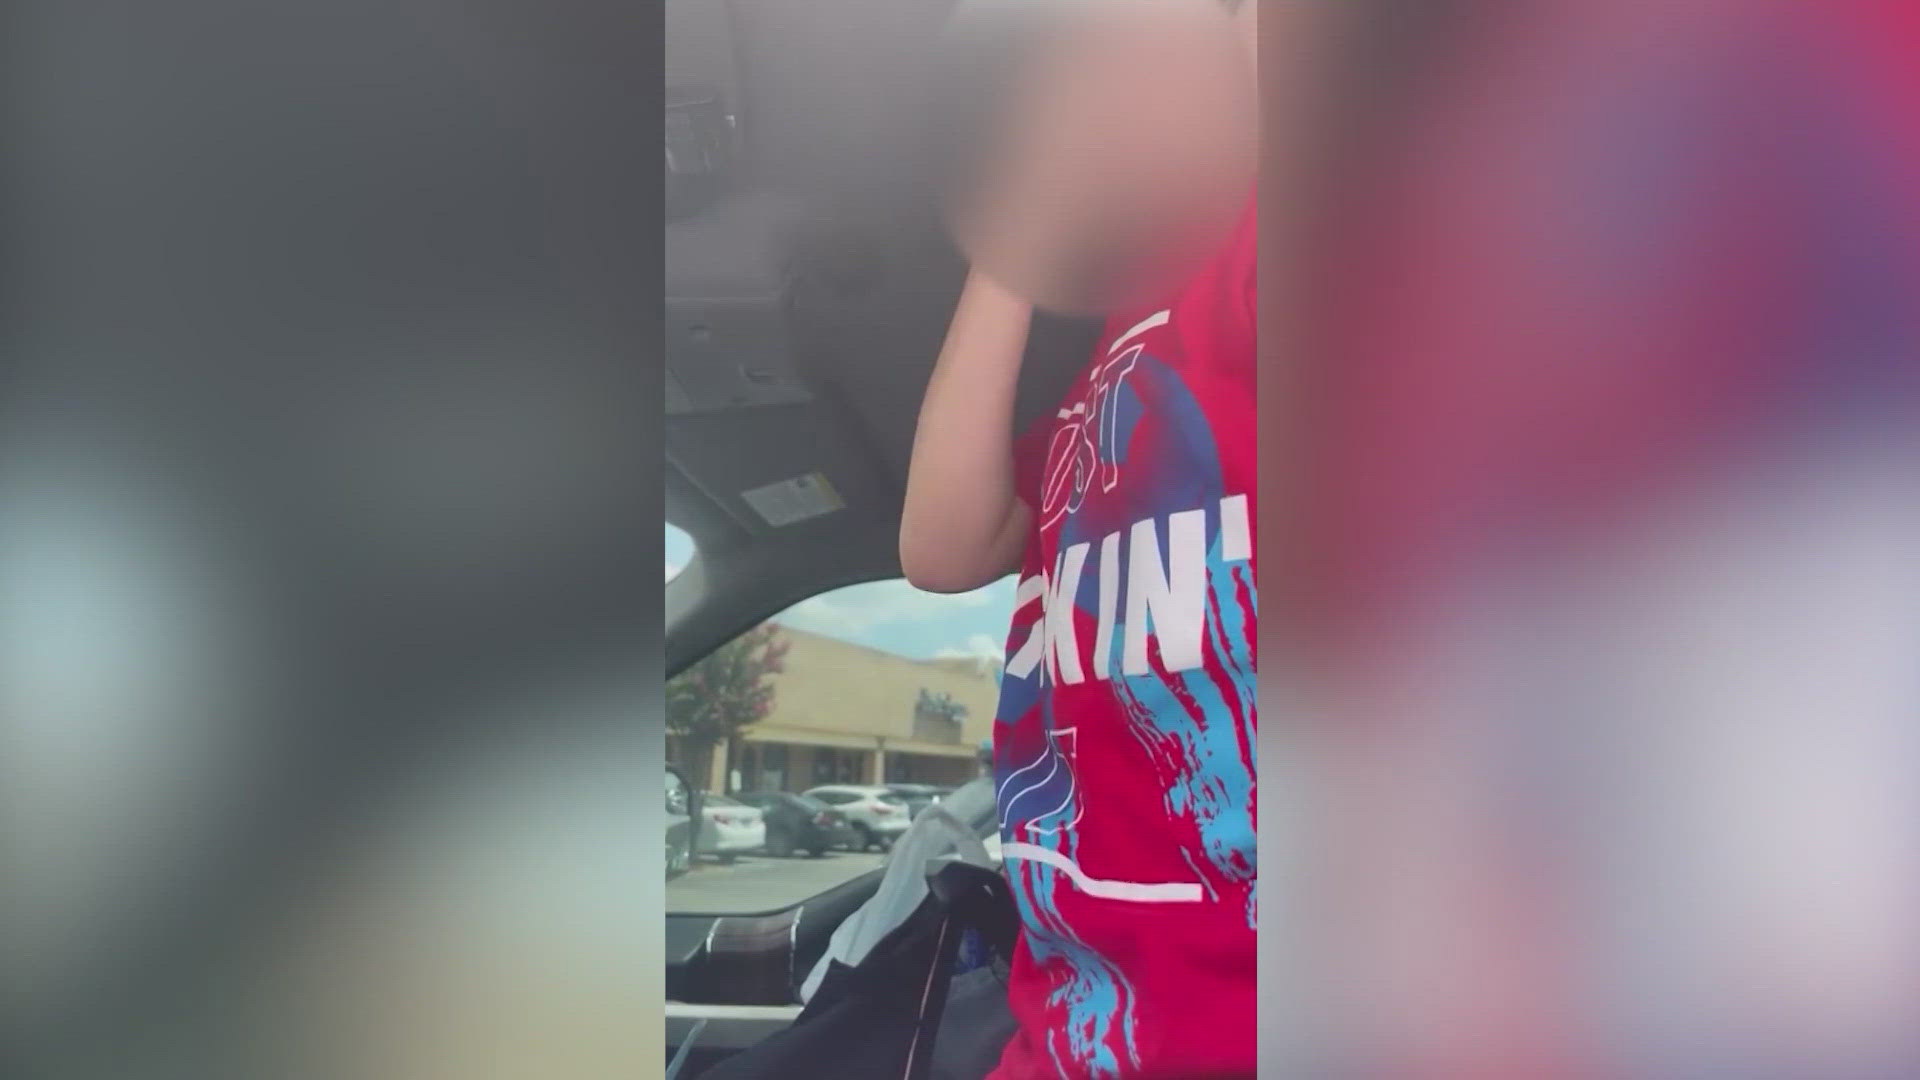 Police say the 33-year-old mother, Angela Garza-Amador left the children in the hot car for nearly an hour while she went shopping.